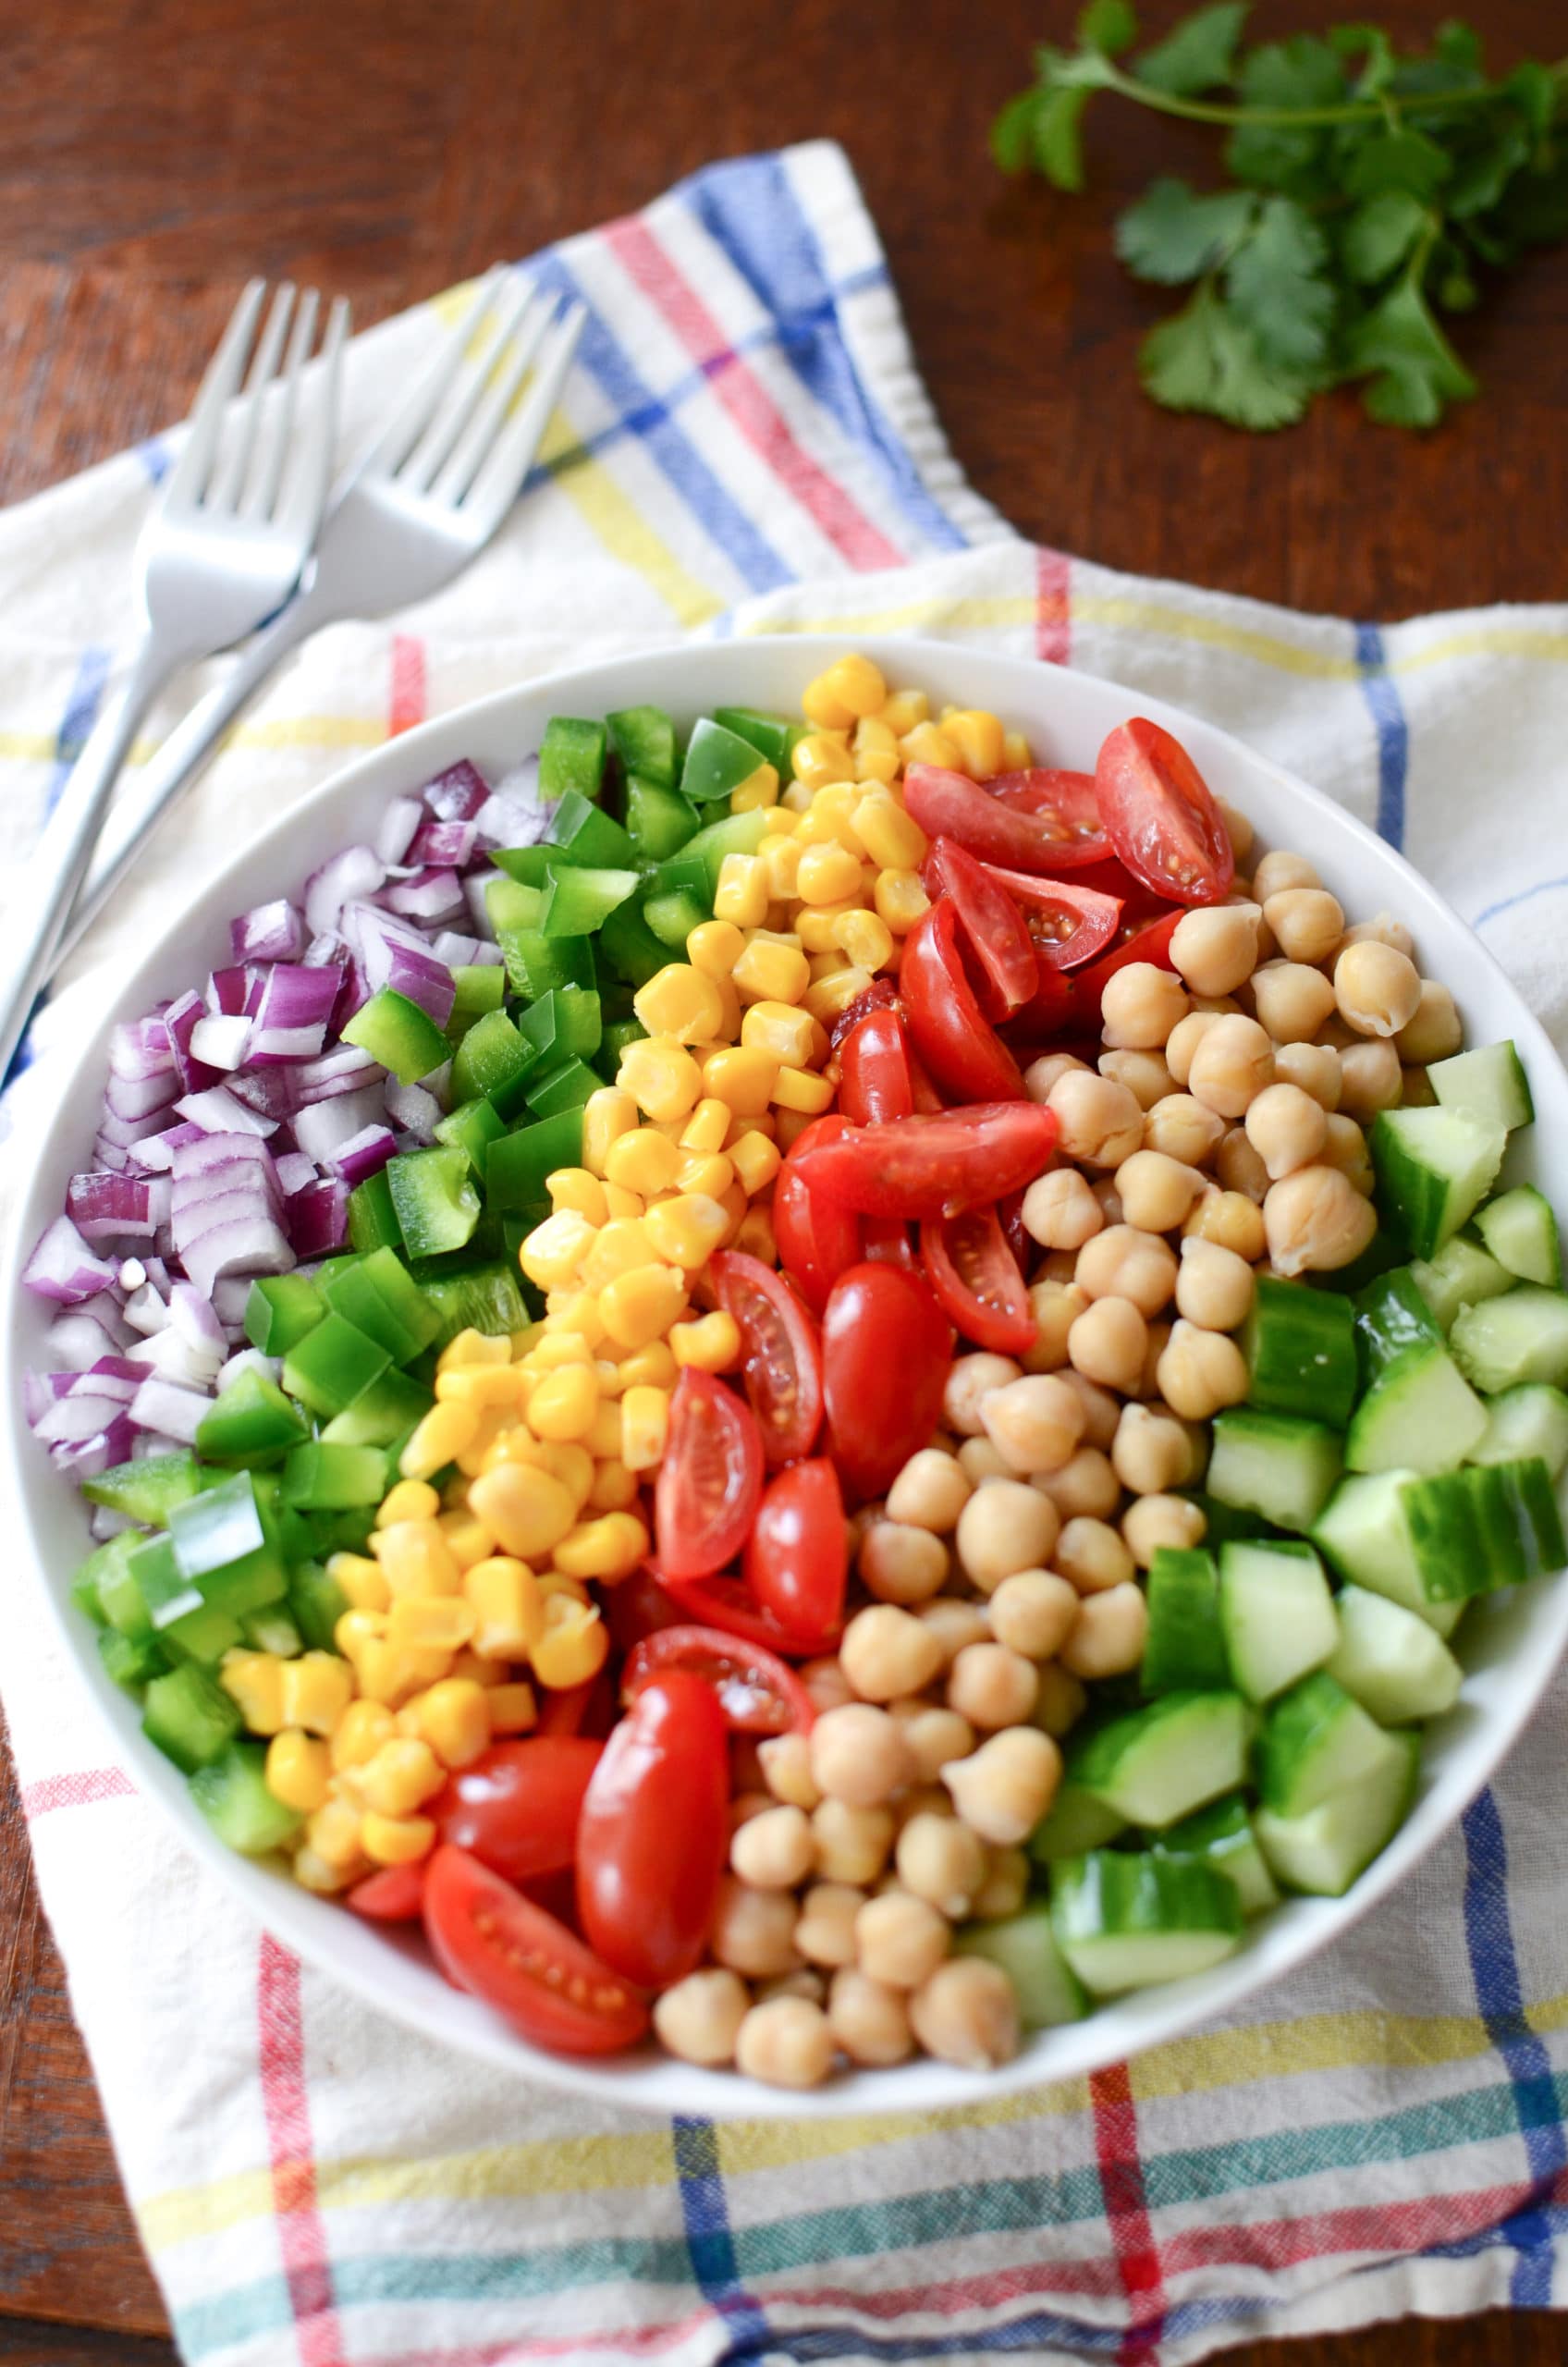 Ingredients for a vegan salad in a bowl, arranged in rainbow like stripes.